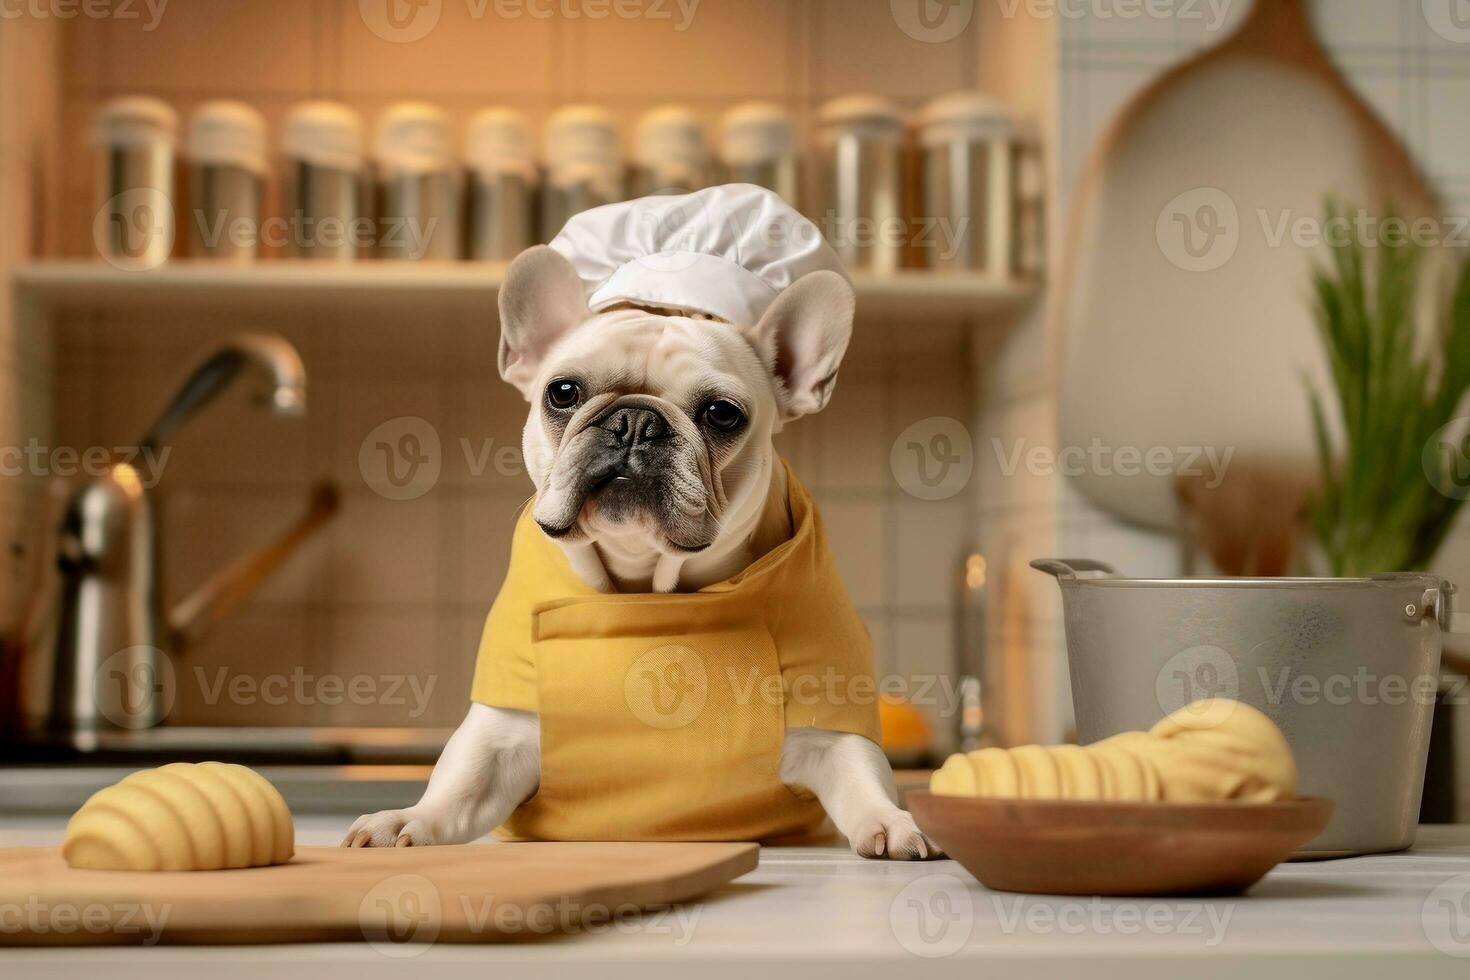 An adorable chef dog wearing a stylish chef's hat sits cooking bread on a wooden table inside a kitchen photo